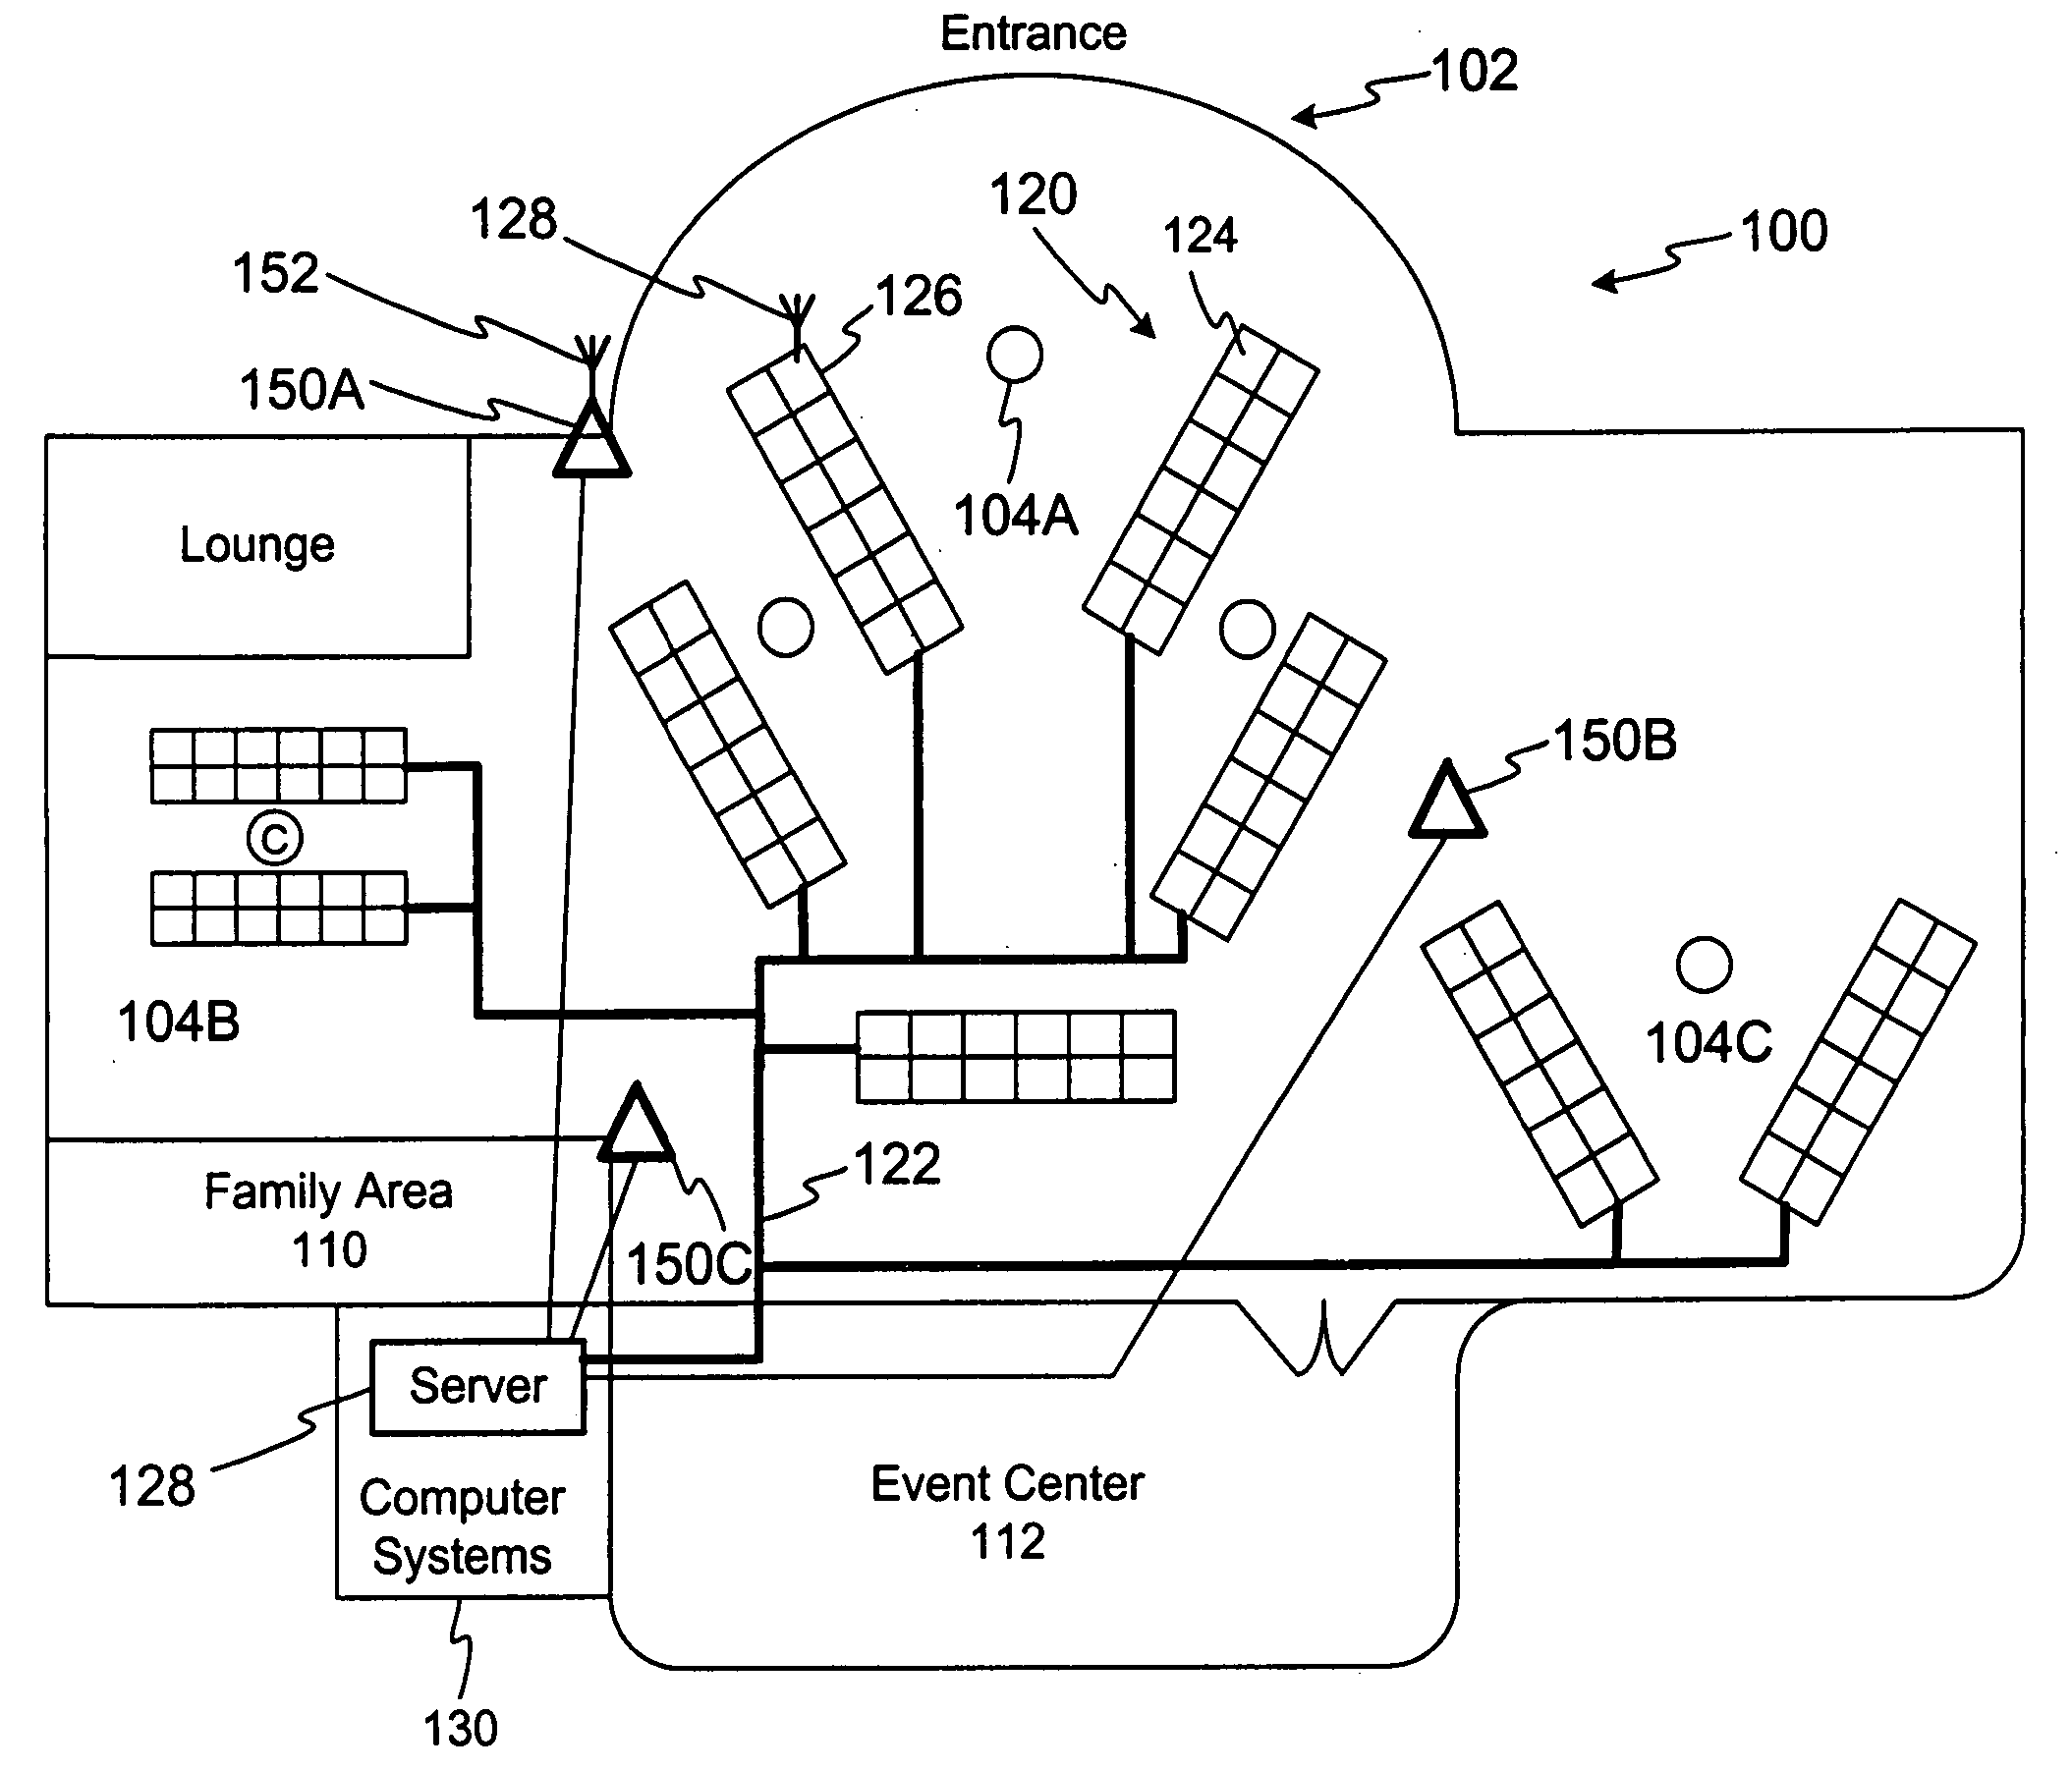 Control and configuration of gaming machines based on gaming machine location